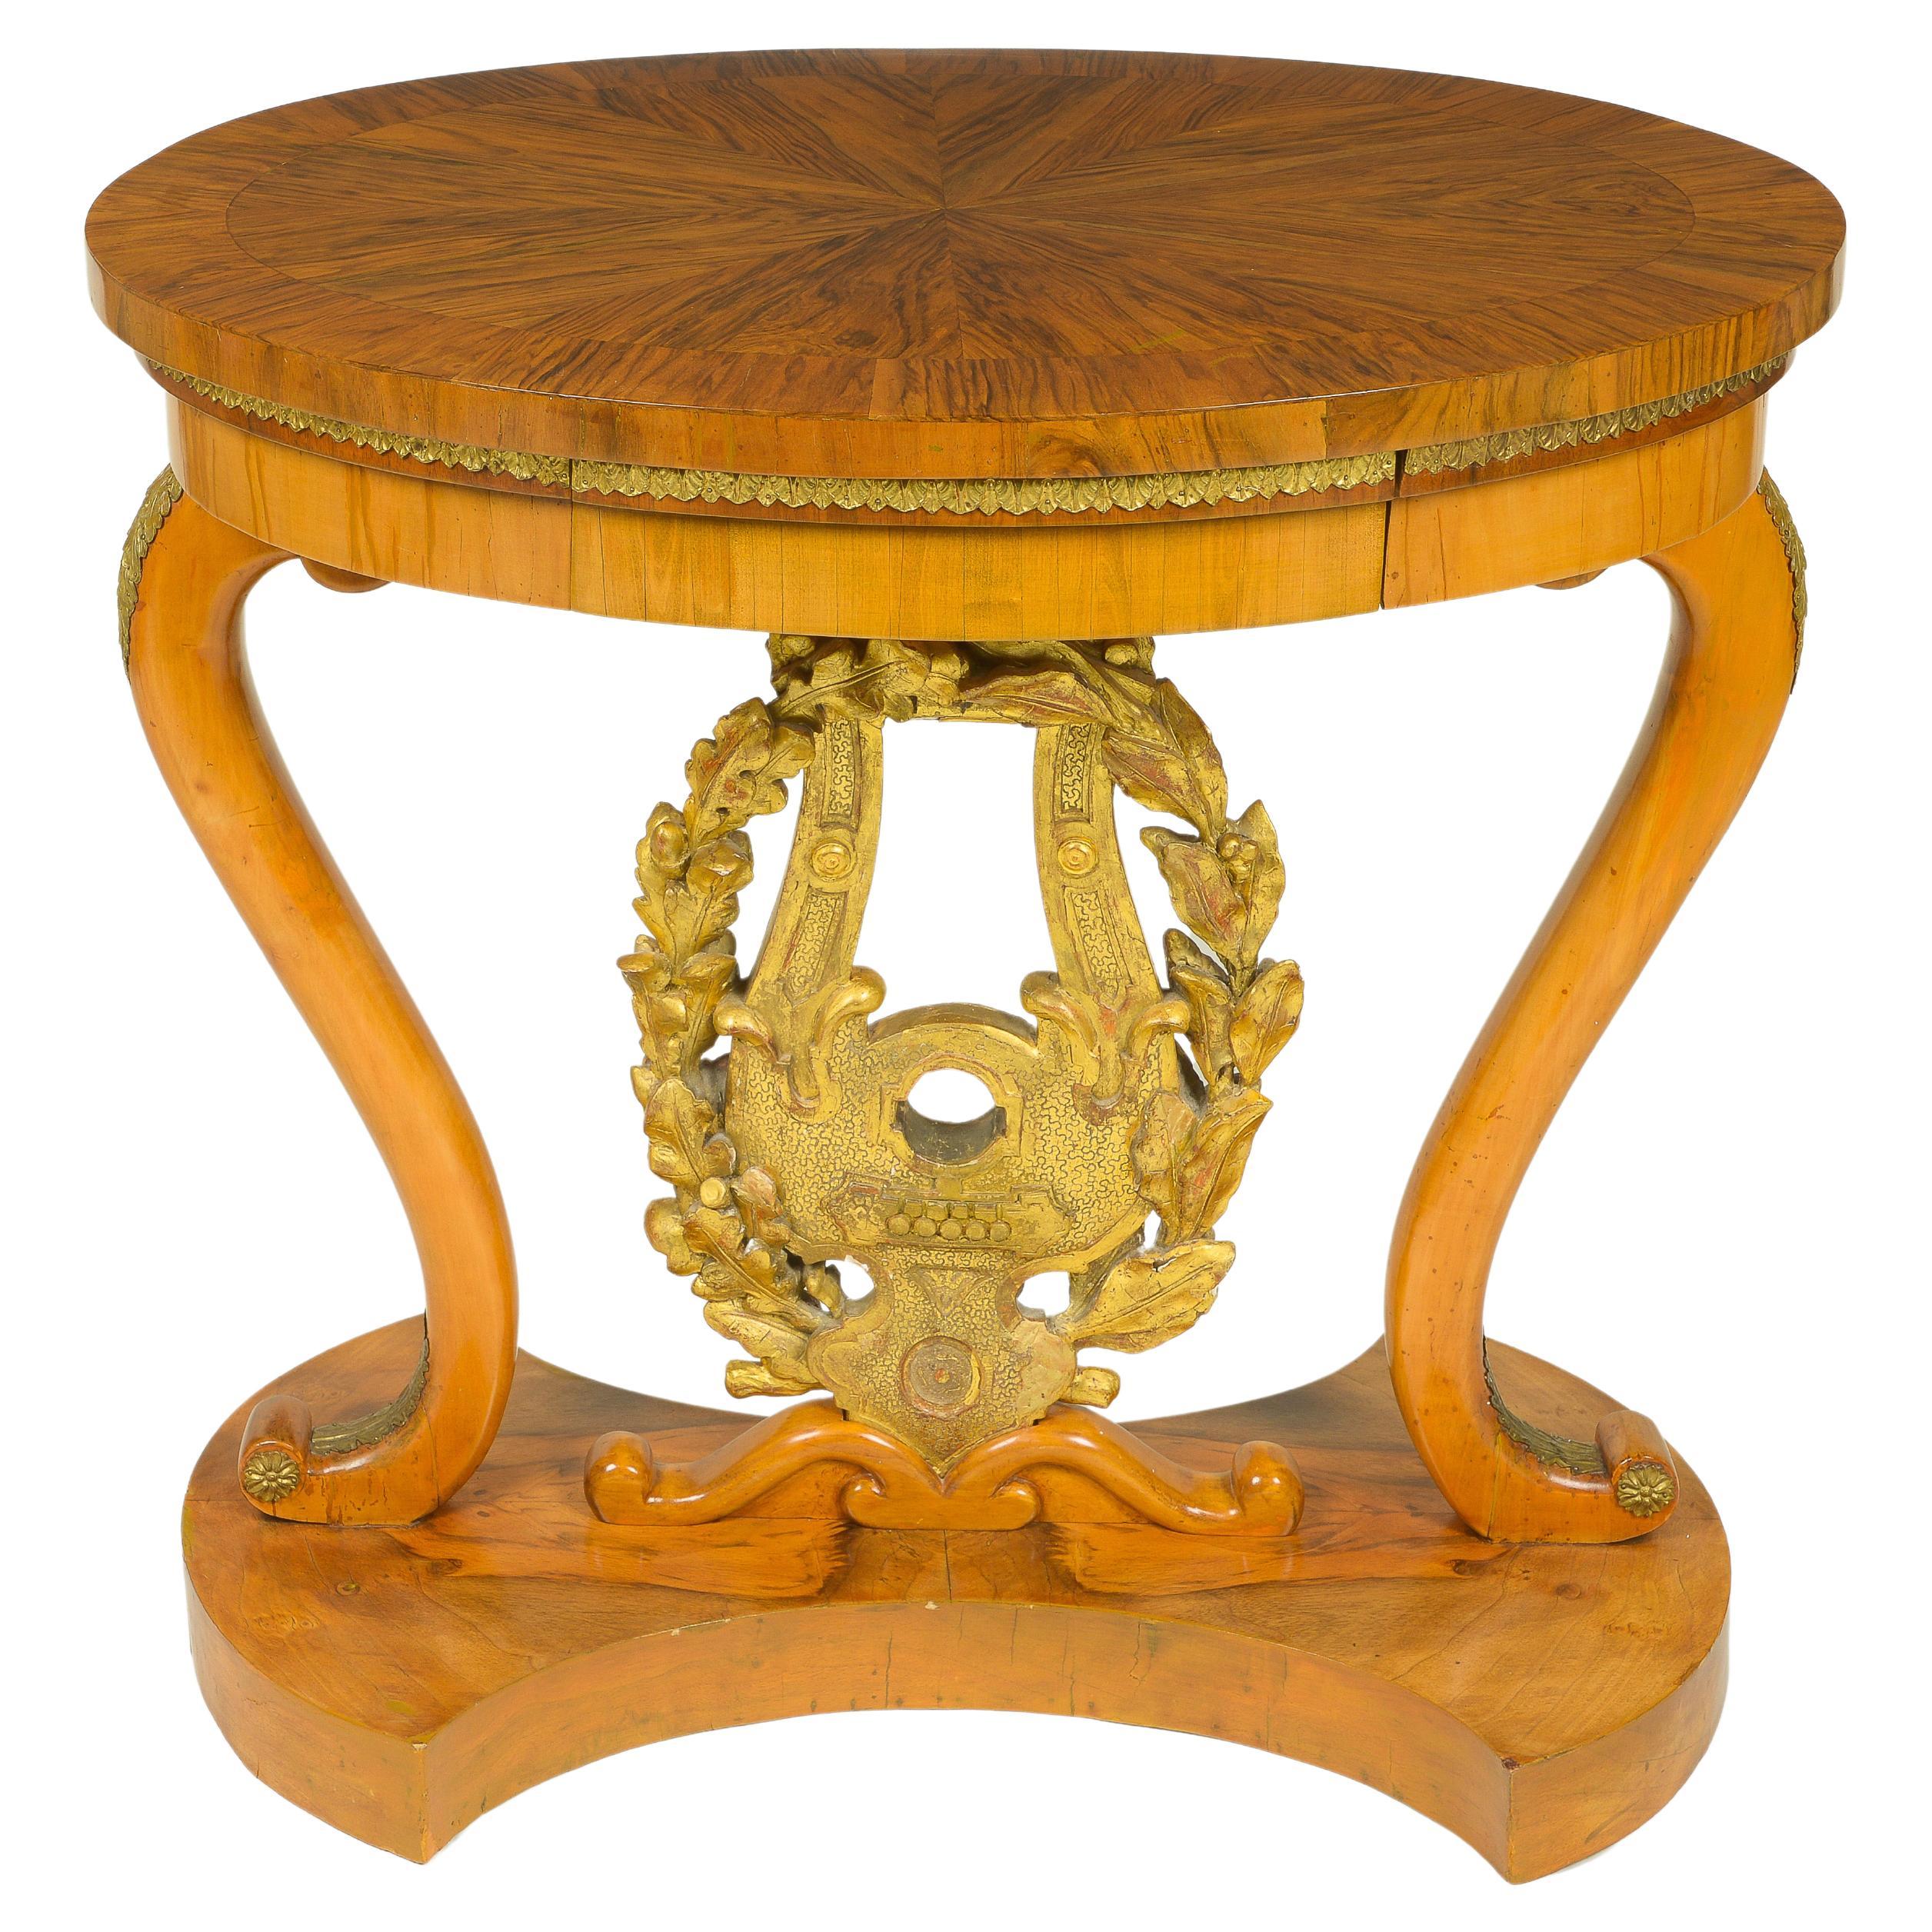 Unusual Italian Walnut and Giltwood Center Table For Sale